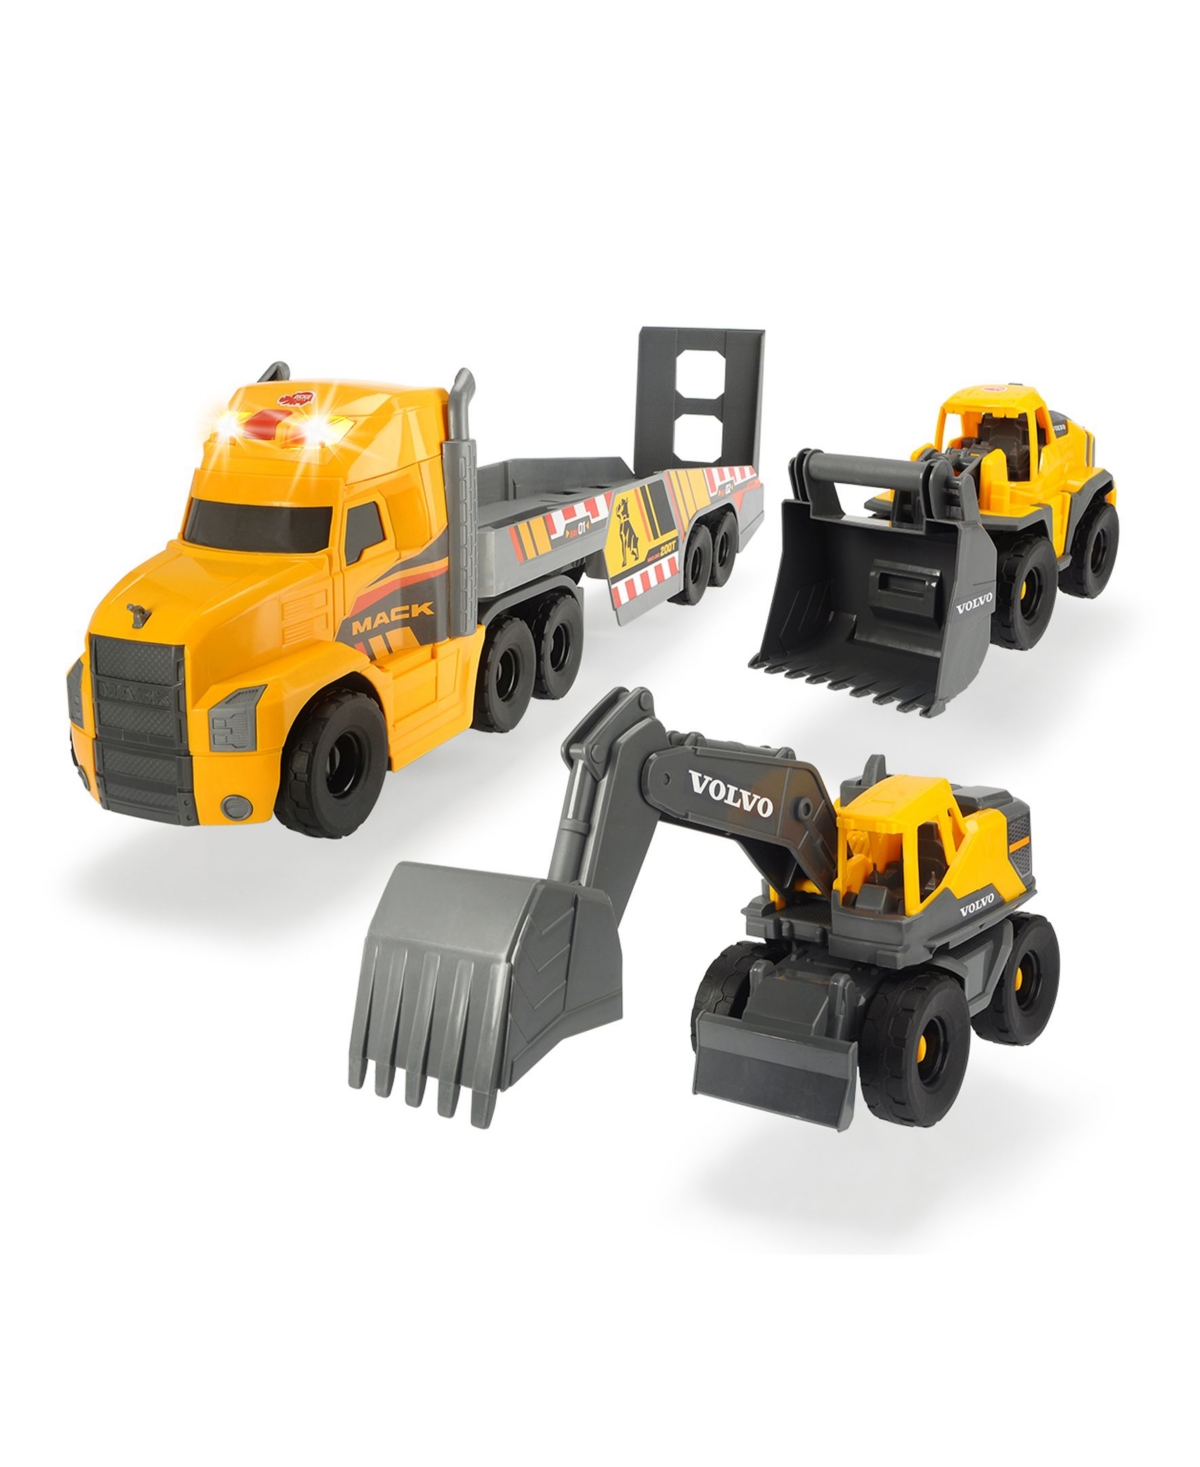 Dickie Toys Hk Ltd Kids' Dickie Toys 28" Mack Truck With 2 Volvo Construction Trucks In Yellow